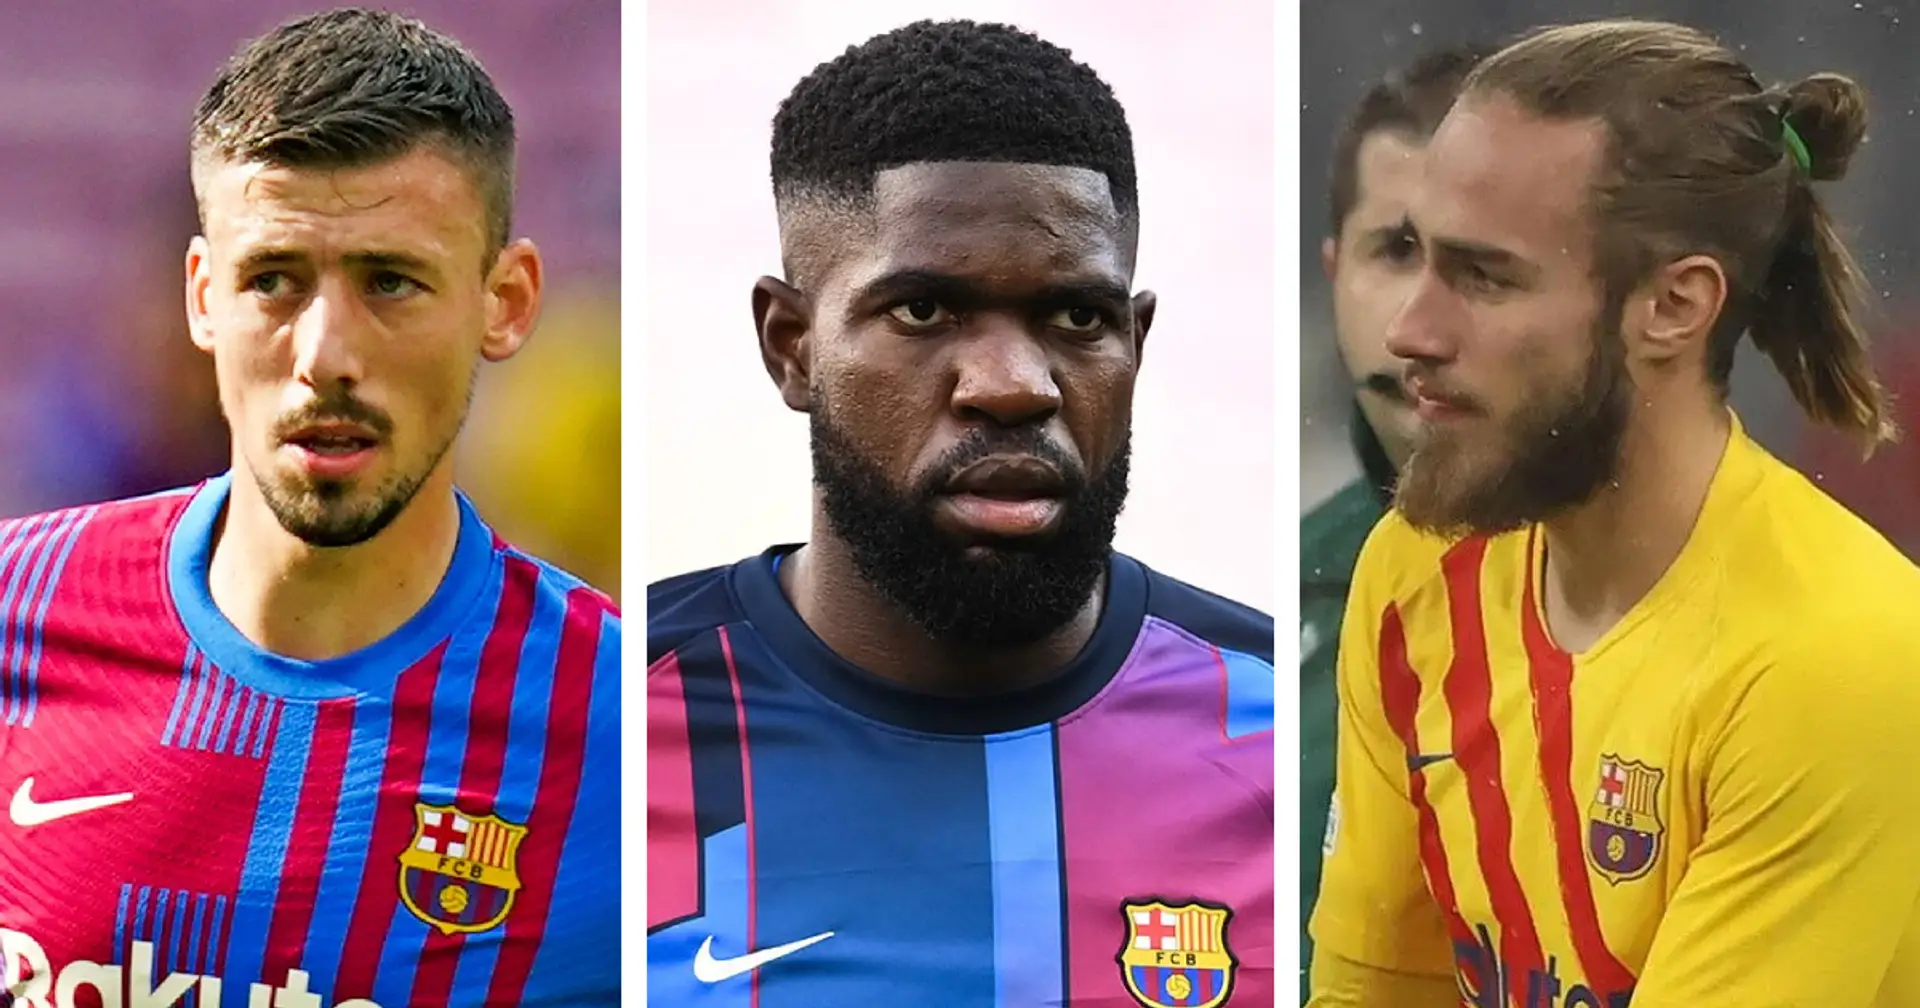 Barcelona 'planning massive' clear-out of defenders - Mingueza, Umtiti, Lenglet included